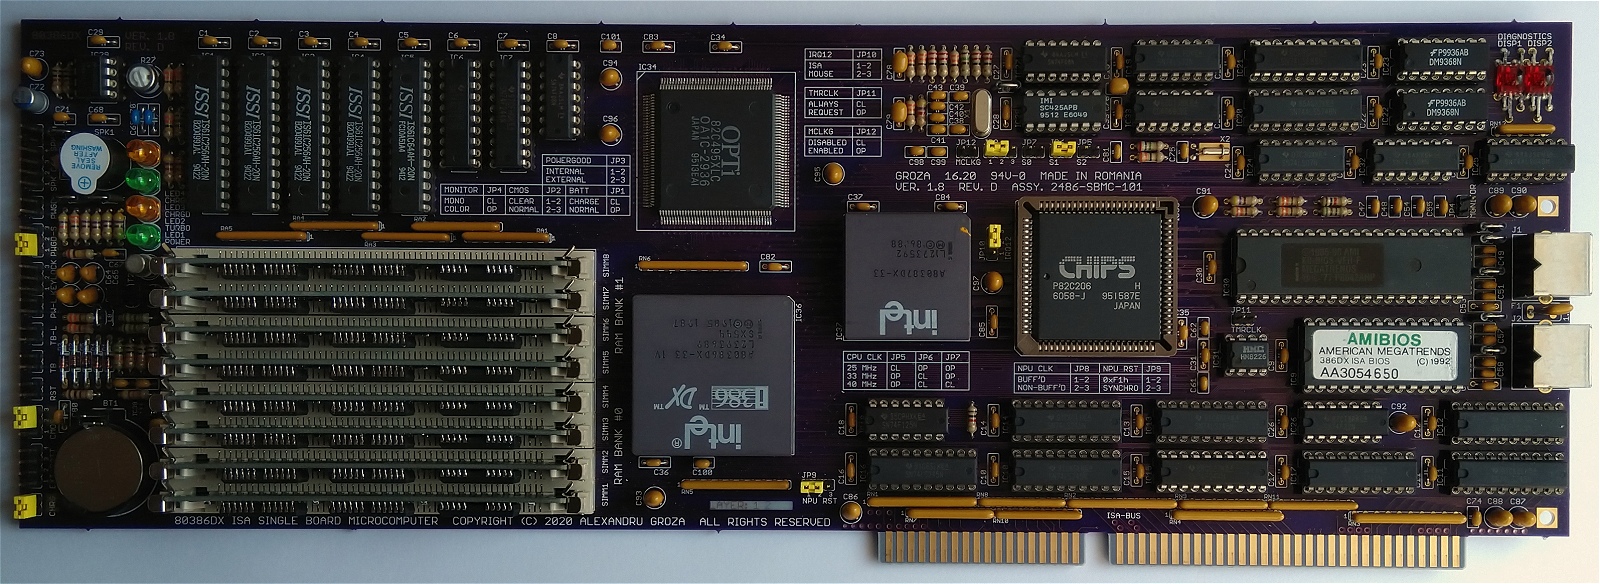 Building Your Own 80386DX ISA Single Board Microcomputer